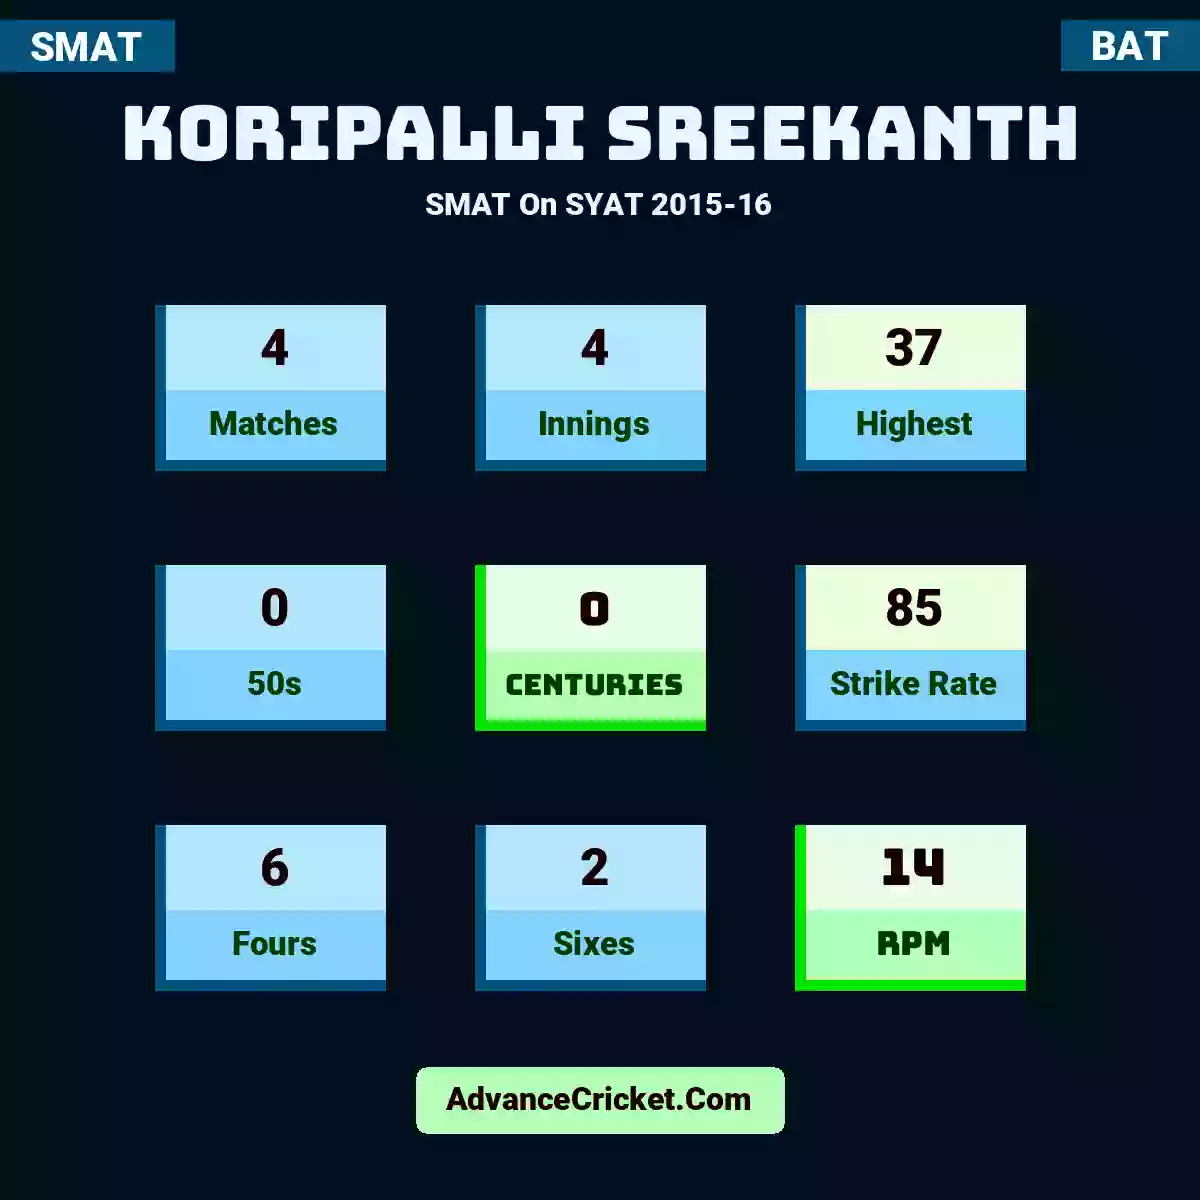 Koripalli Sreekanth SMAT  On SYAT 2015-16, Koripalli Sreekanth played 4 matches, scored 37 runs as highest, 0 half-centuries, and 0 centuries, with a strike rate of 85. K.Sreekanth hit 6 fours and 2 sixes, with an RPM of 14.